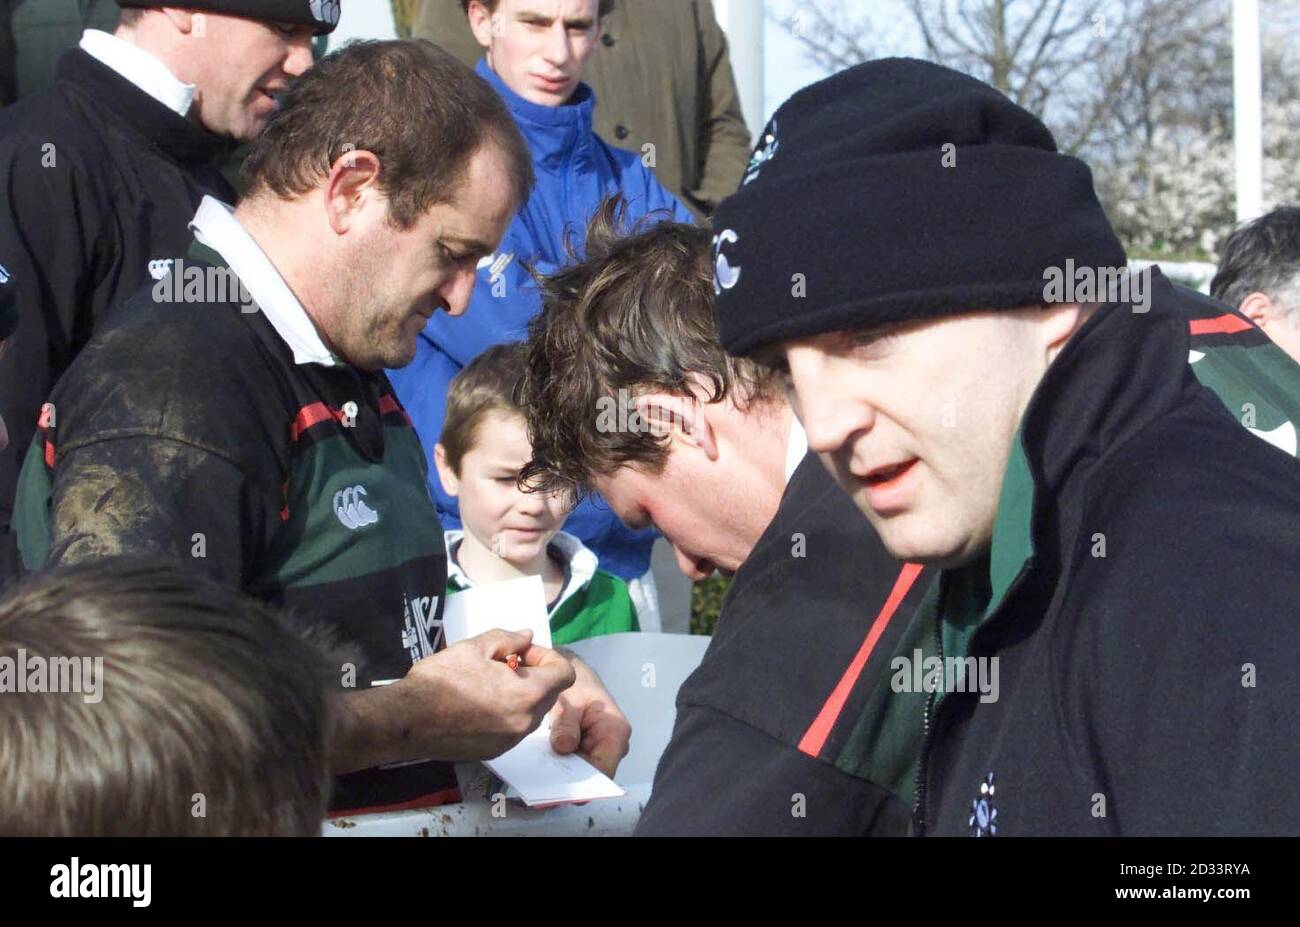 Ireland's Captain Keith Wood (right) out of the team because of a leg injury, signs autographs for fans with prop Peter Clohessy, after a training session at Greystones Co. Wicklow, Eire, before Saturday's Lloyds TSB Six Nations Championship match match against England. Stock Photo